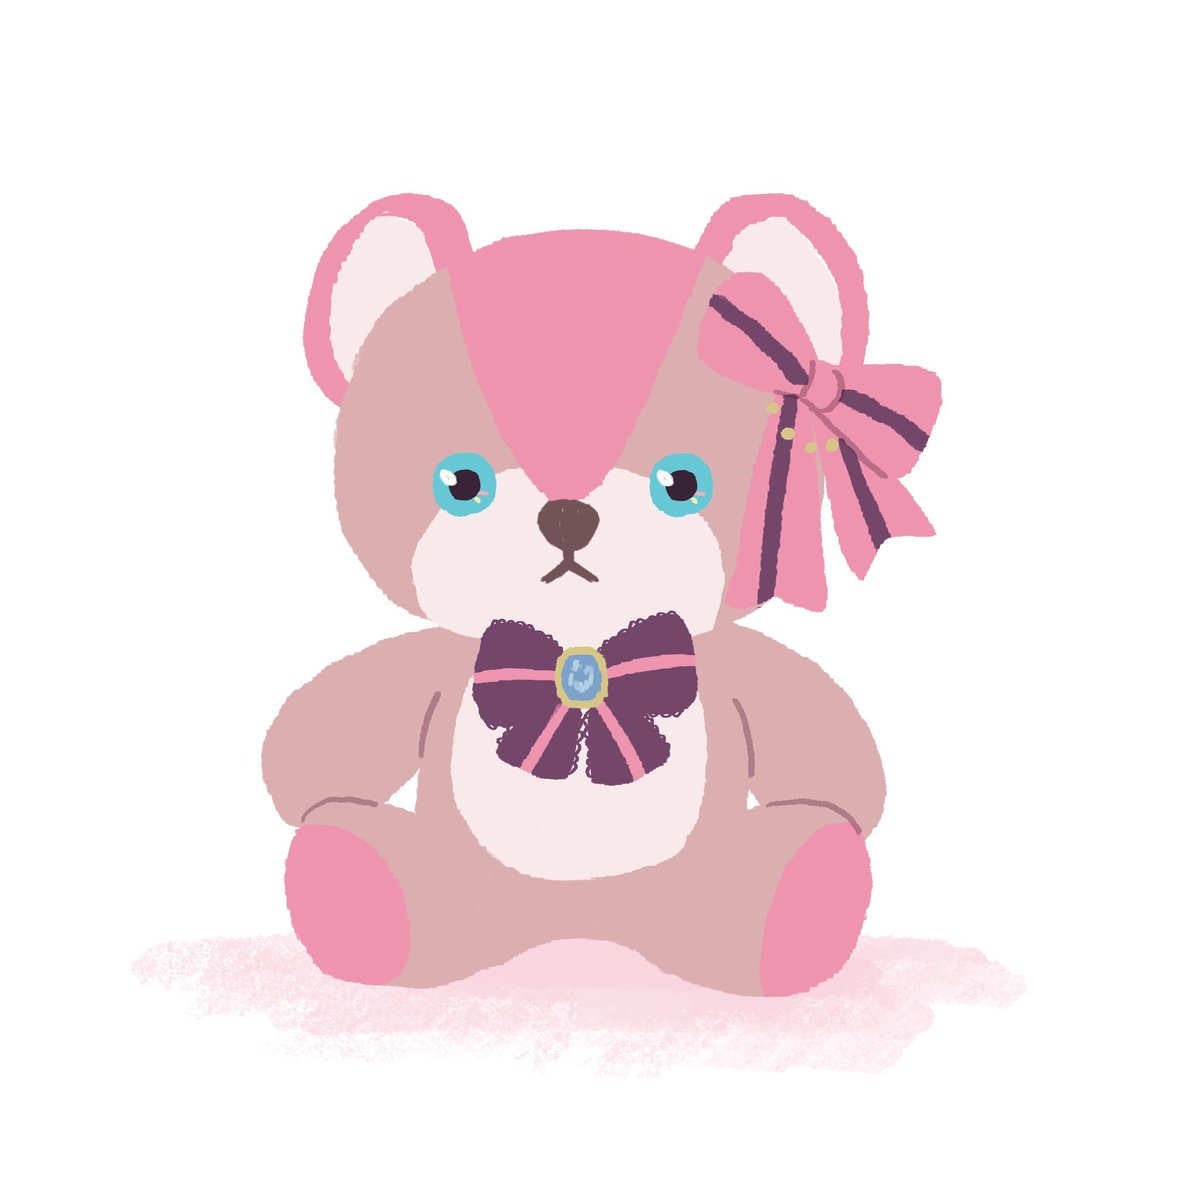 teddy bear stuffed toy stuffed animal no humans bow sitting striped bow  illustration images